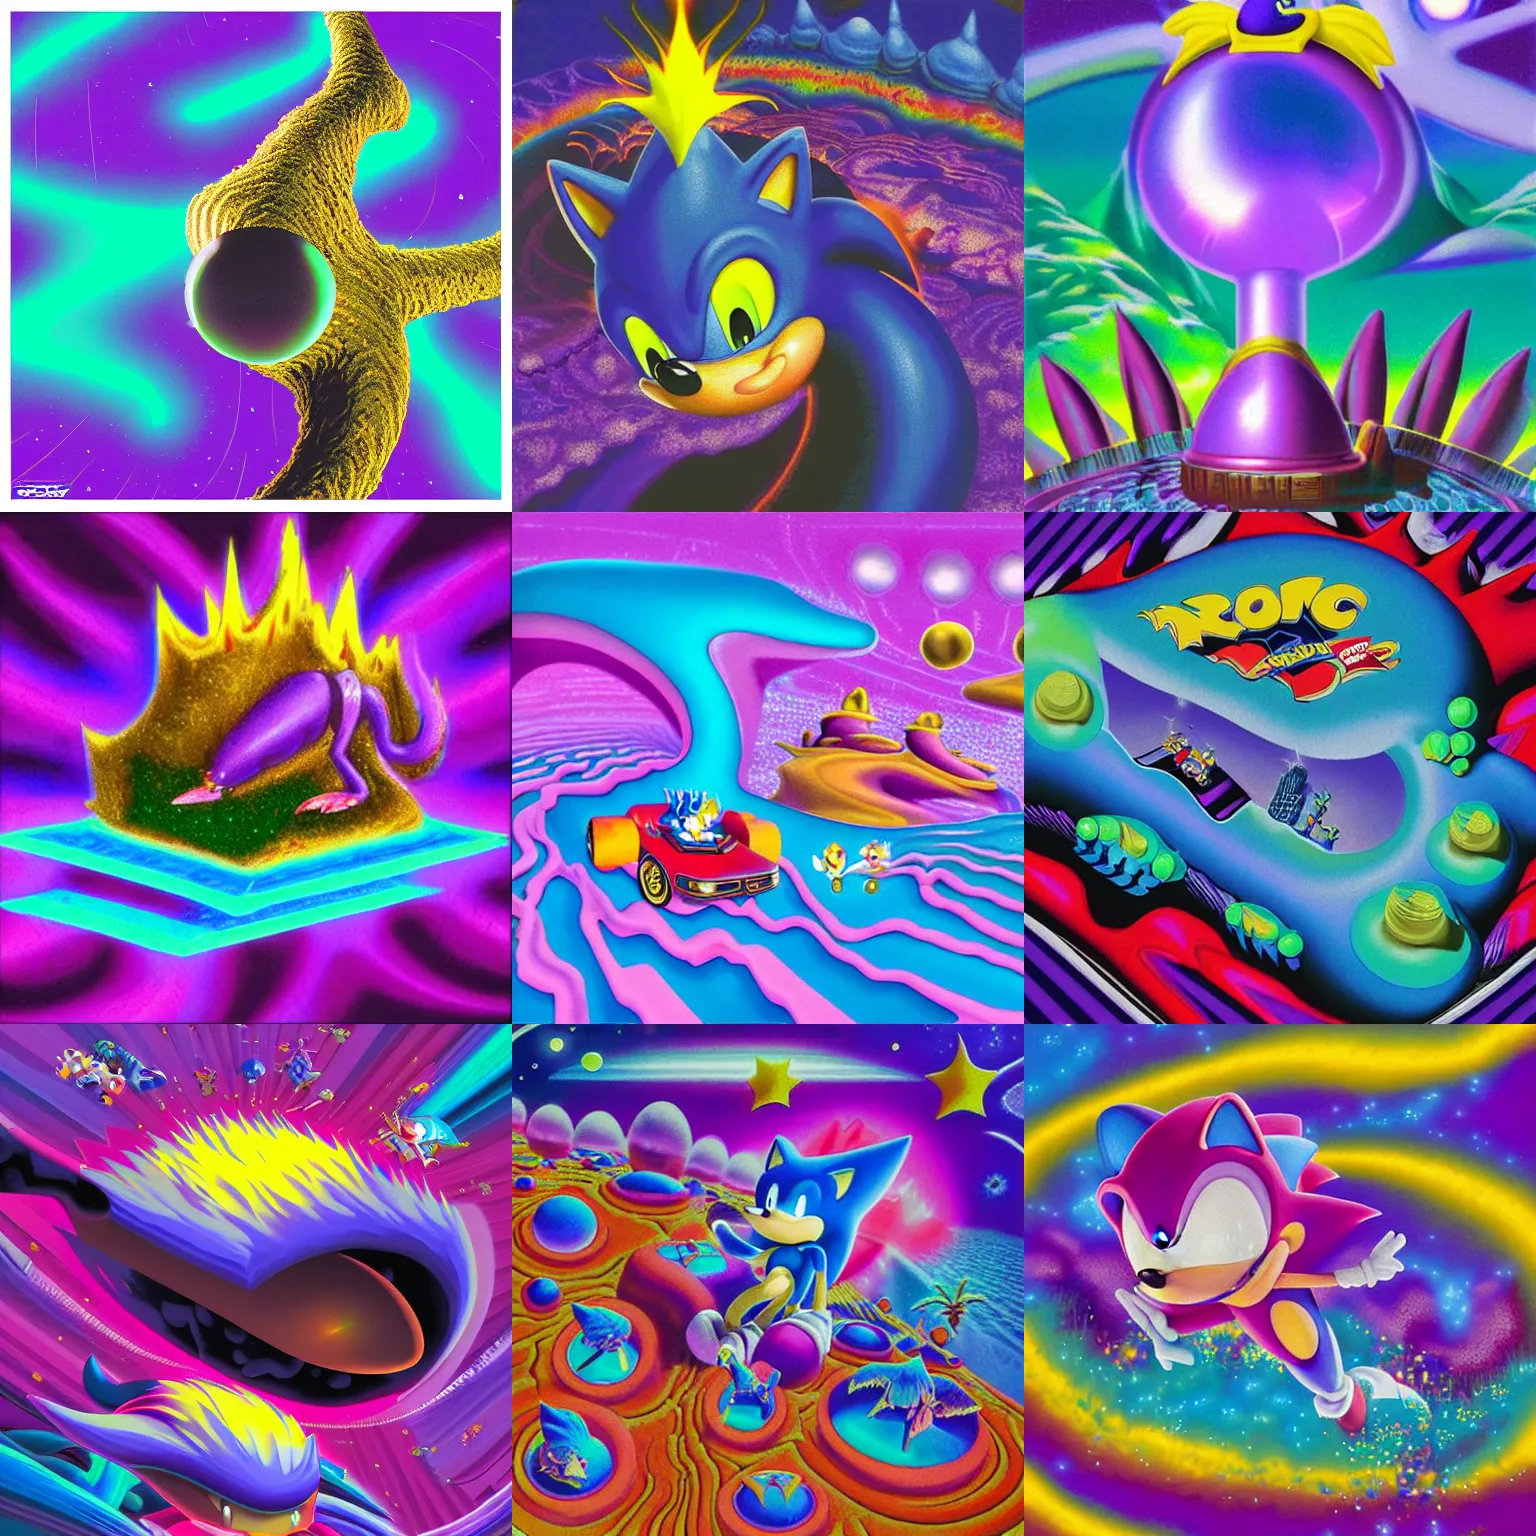 Prompt: dreaming of closeup sonic hedgehog portrait lava lamp claymation scifi matte painting landscape of a surreal stars, retro moulded professional soft pastels high quality airbrush art album cover of a liquid dissolving airbrush art lsd sonic the hedgehog swimming through cyberspace purple teal checkerboard background 1 9 8 0 s 1 9 8 2 sega genesis video game album cover